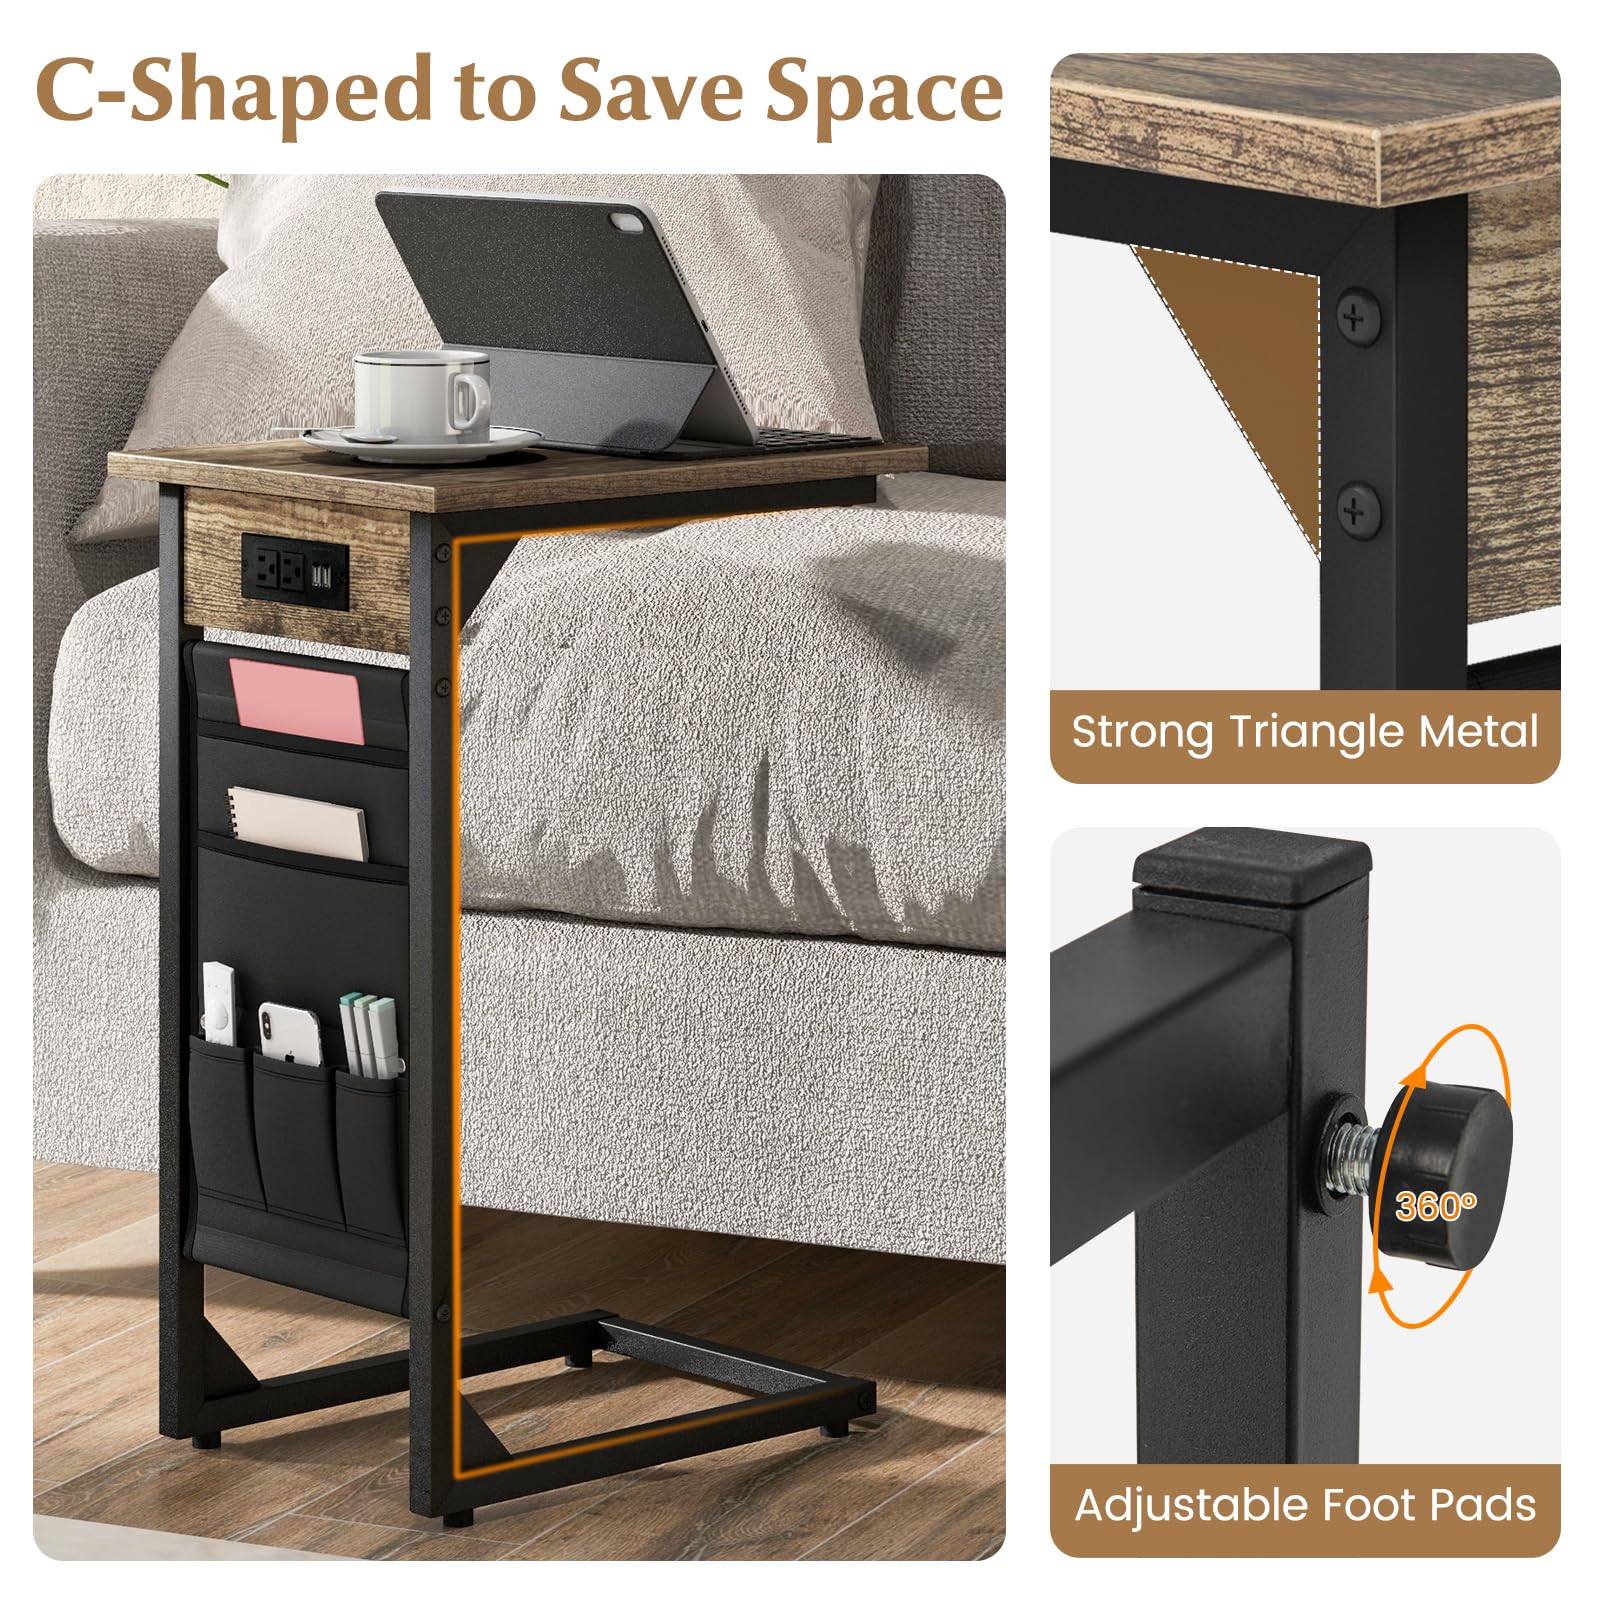 Giantex C Shaped End Table Set of 2, Sofa Side Table with Charging Station & Side Storage Bag, Rustic Brown